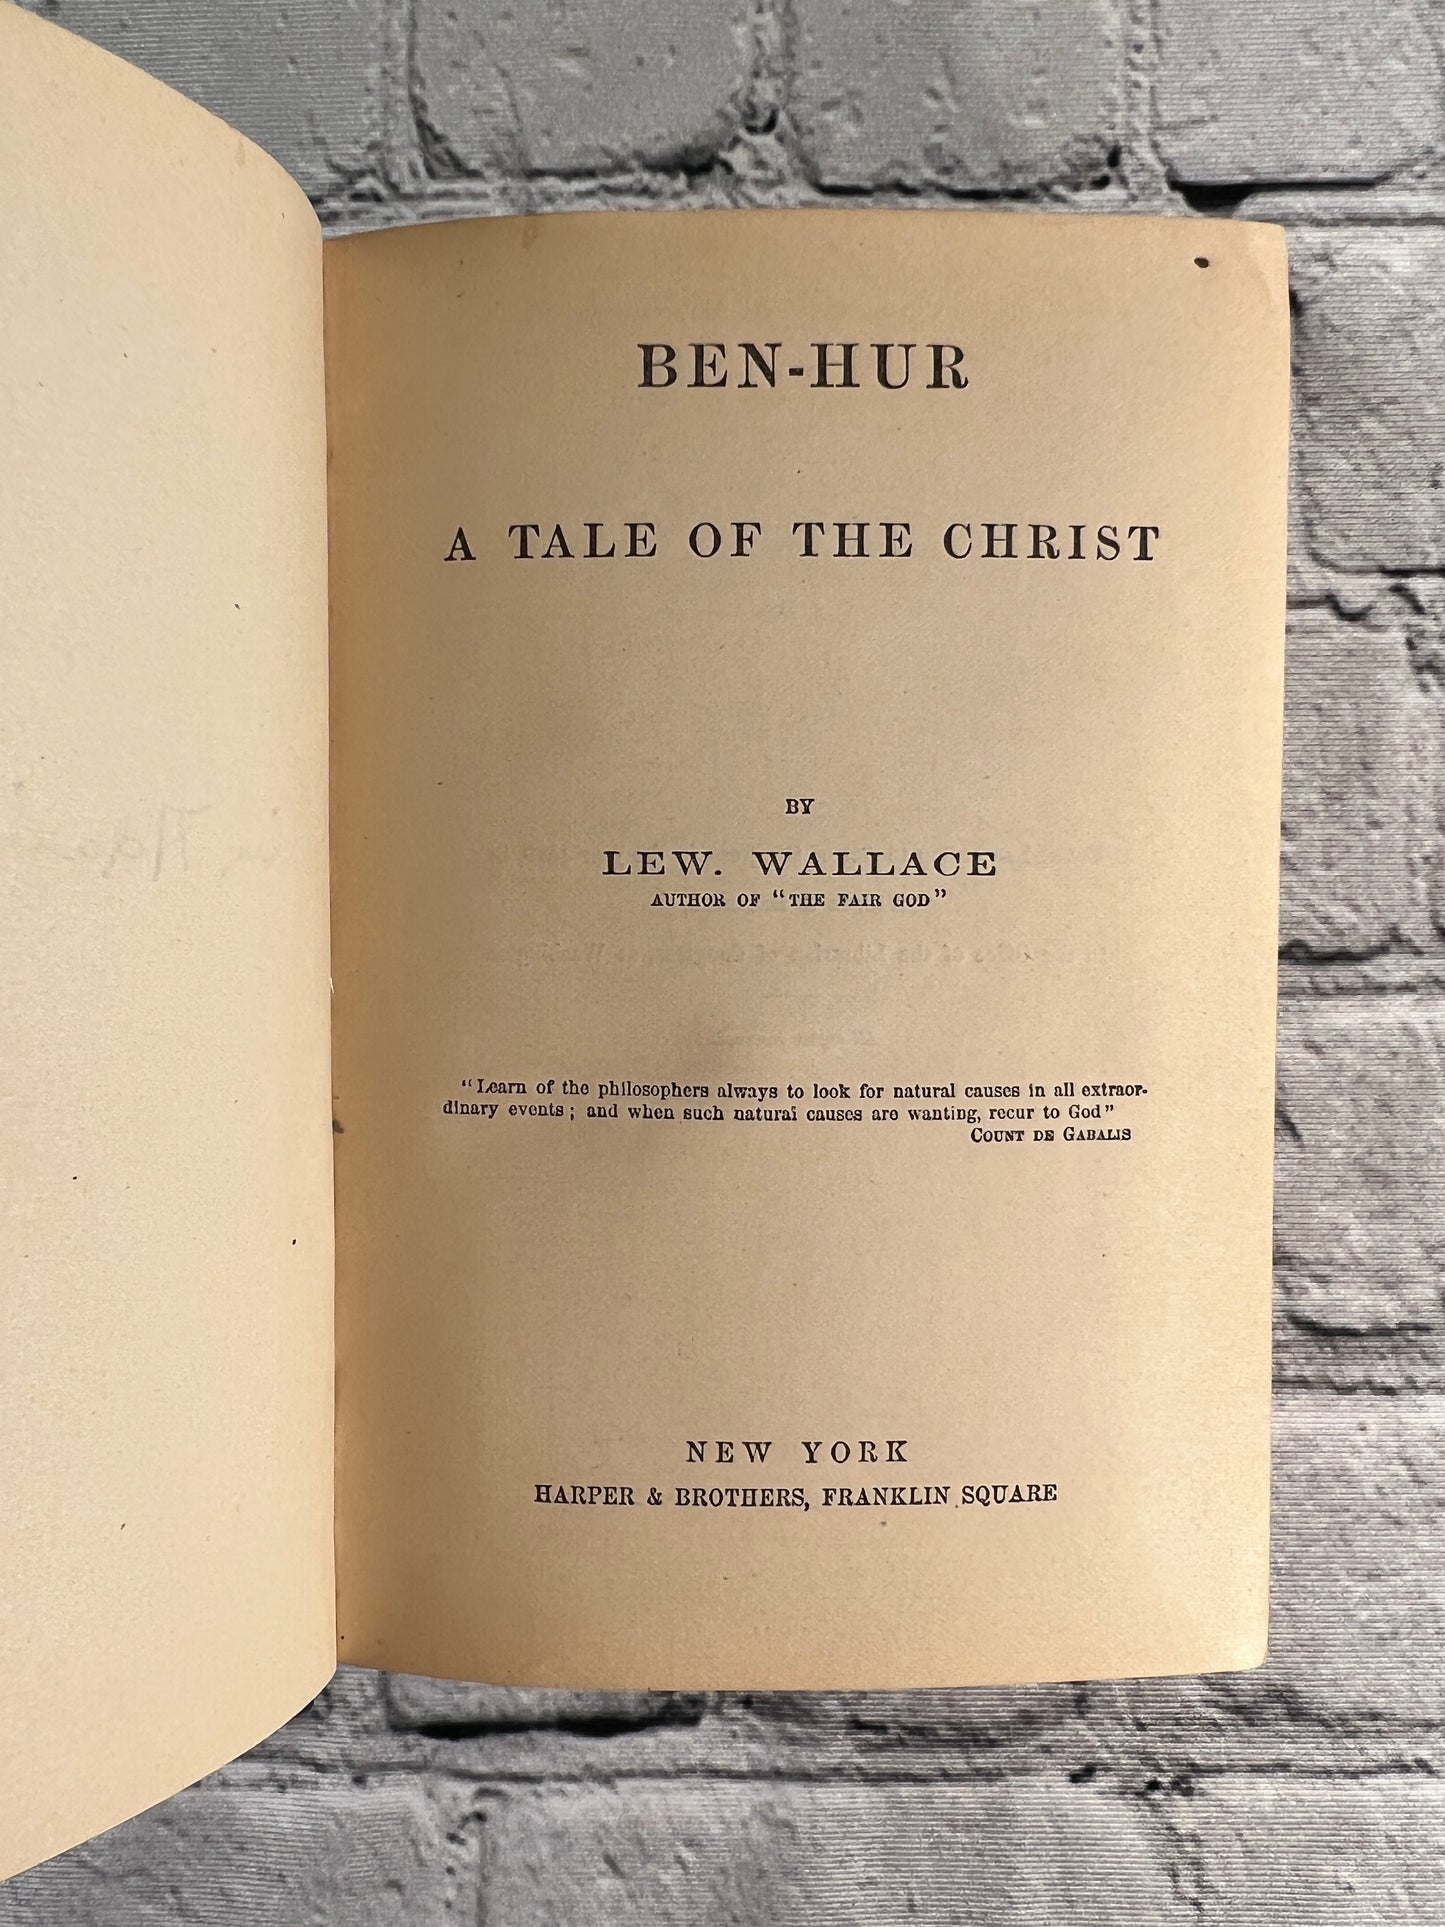 Ben-Hur: A Tale of the Christ by Lew. Wallace [1880]